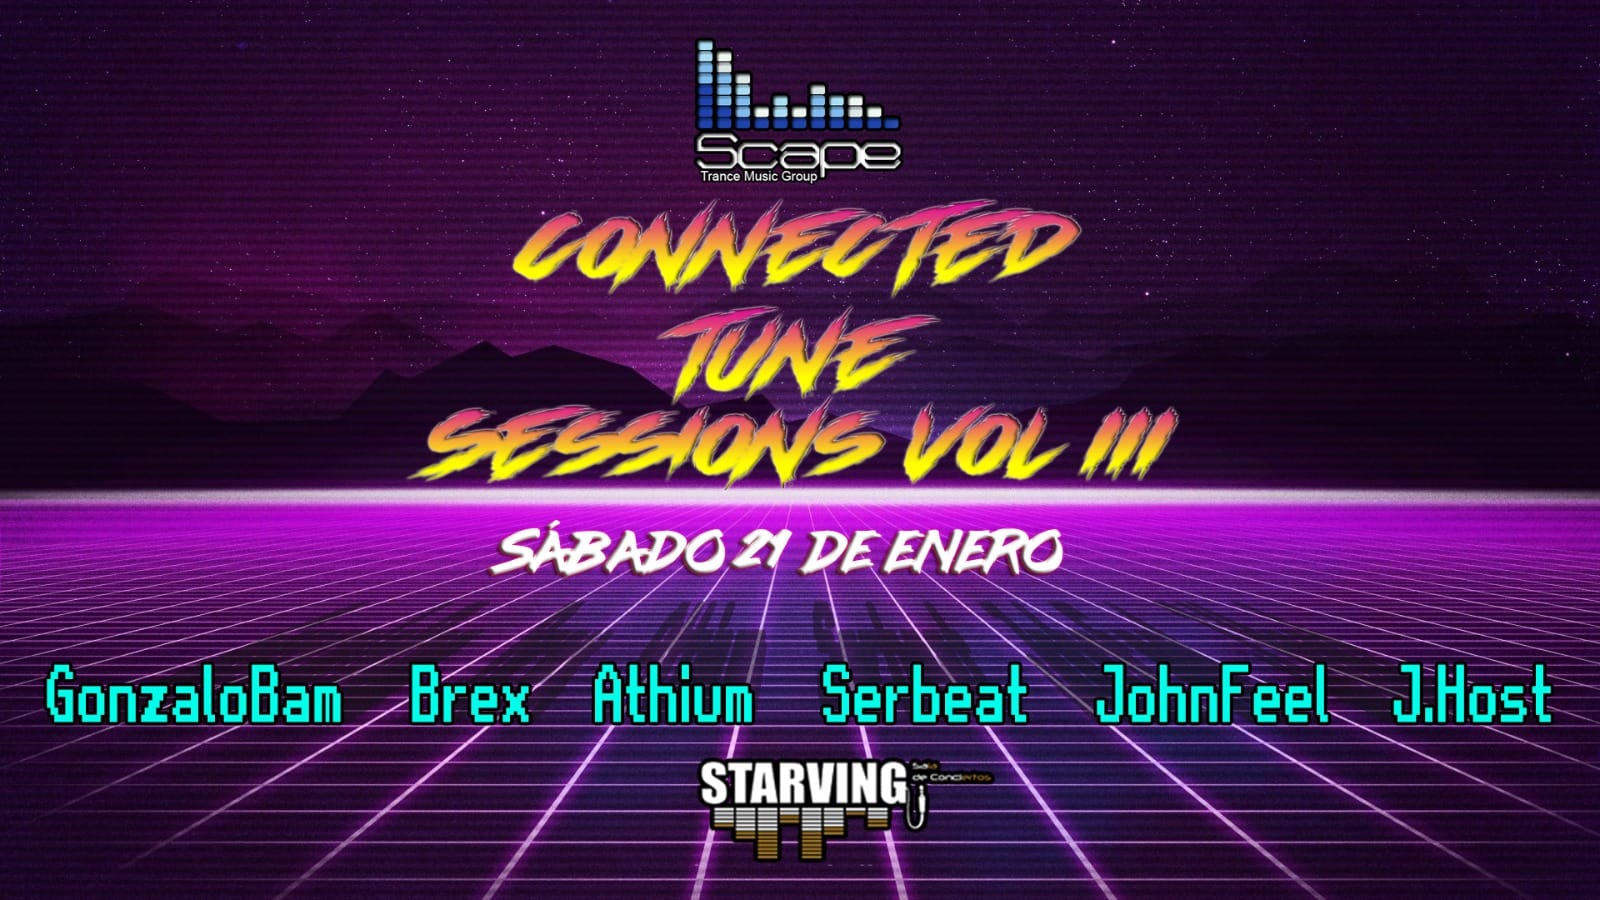 Scape Connected Tune Sessions Vol.3